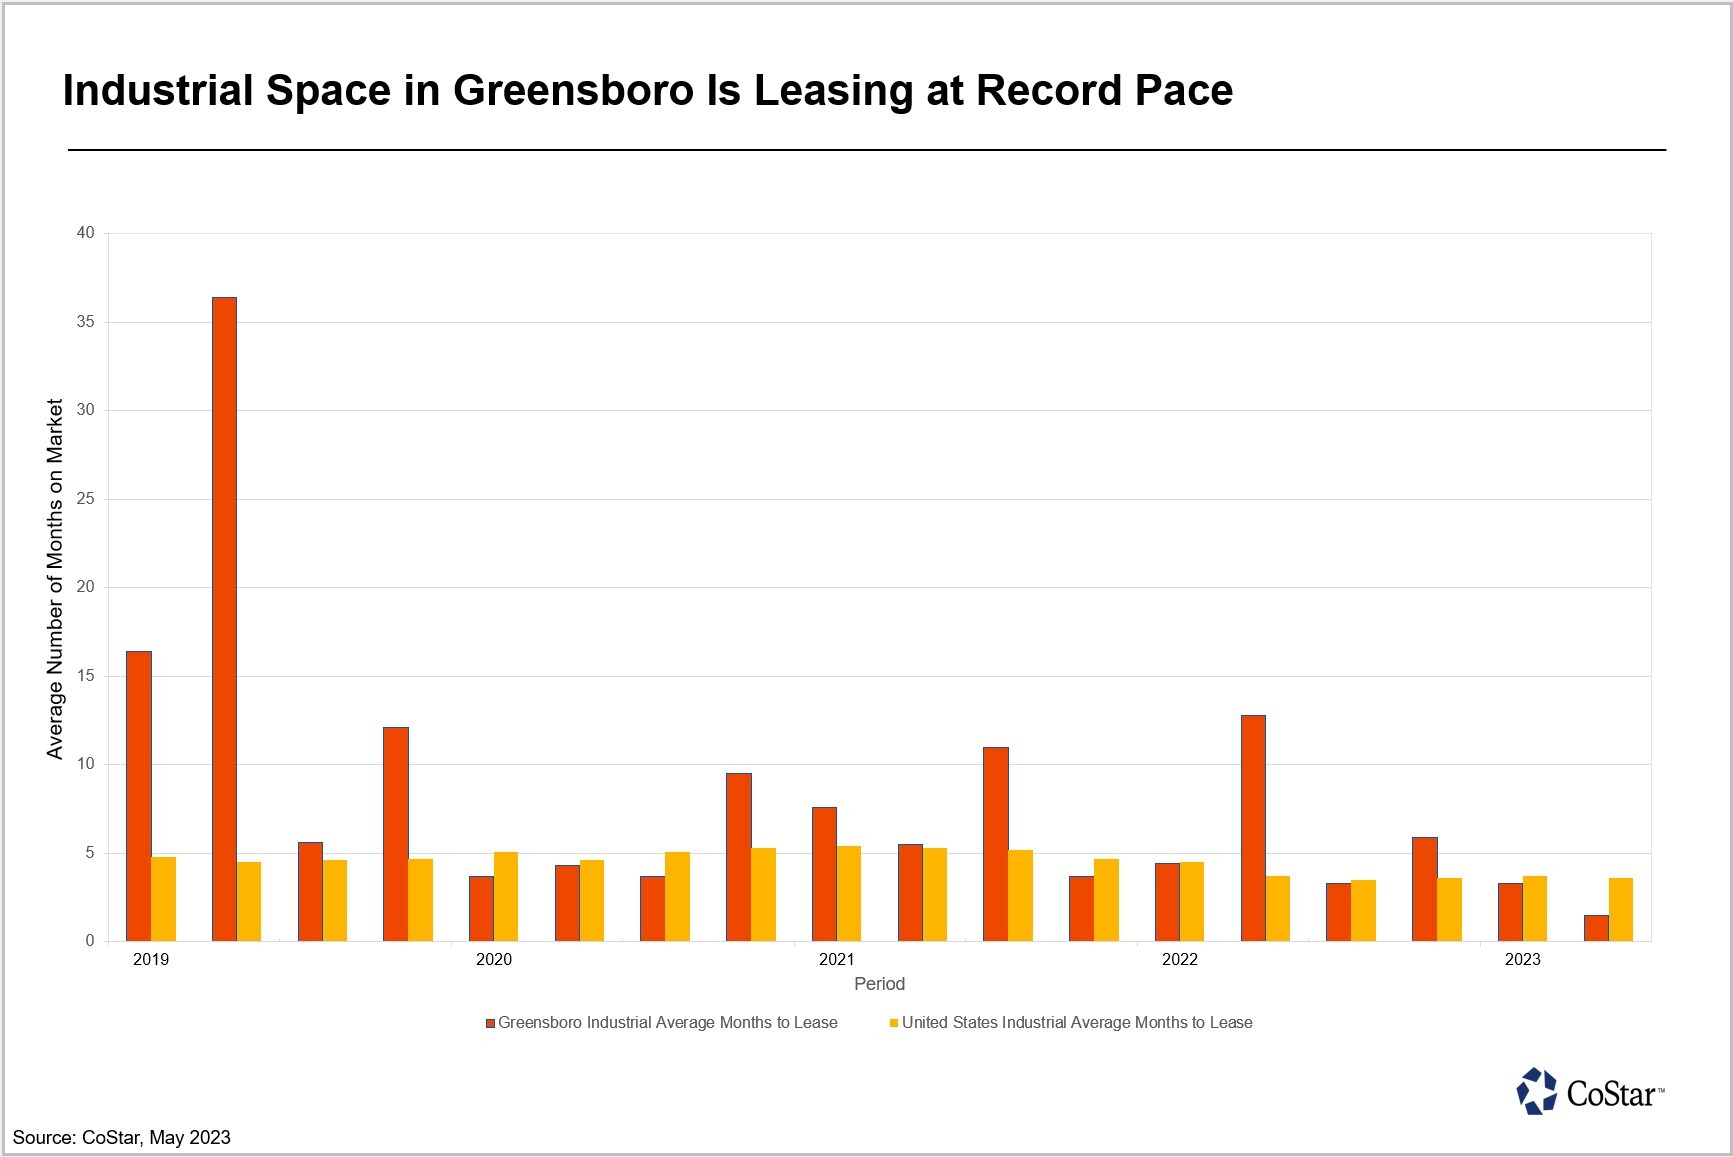 Industrial Space in Greensboro Is Leasing at Fastest Rate on Record